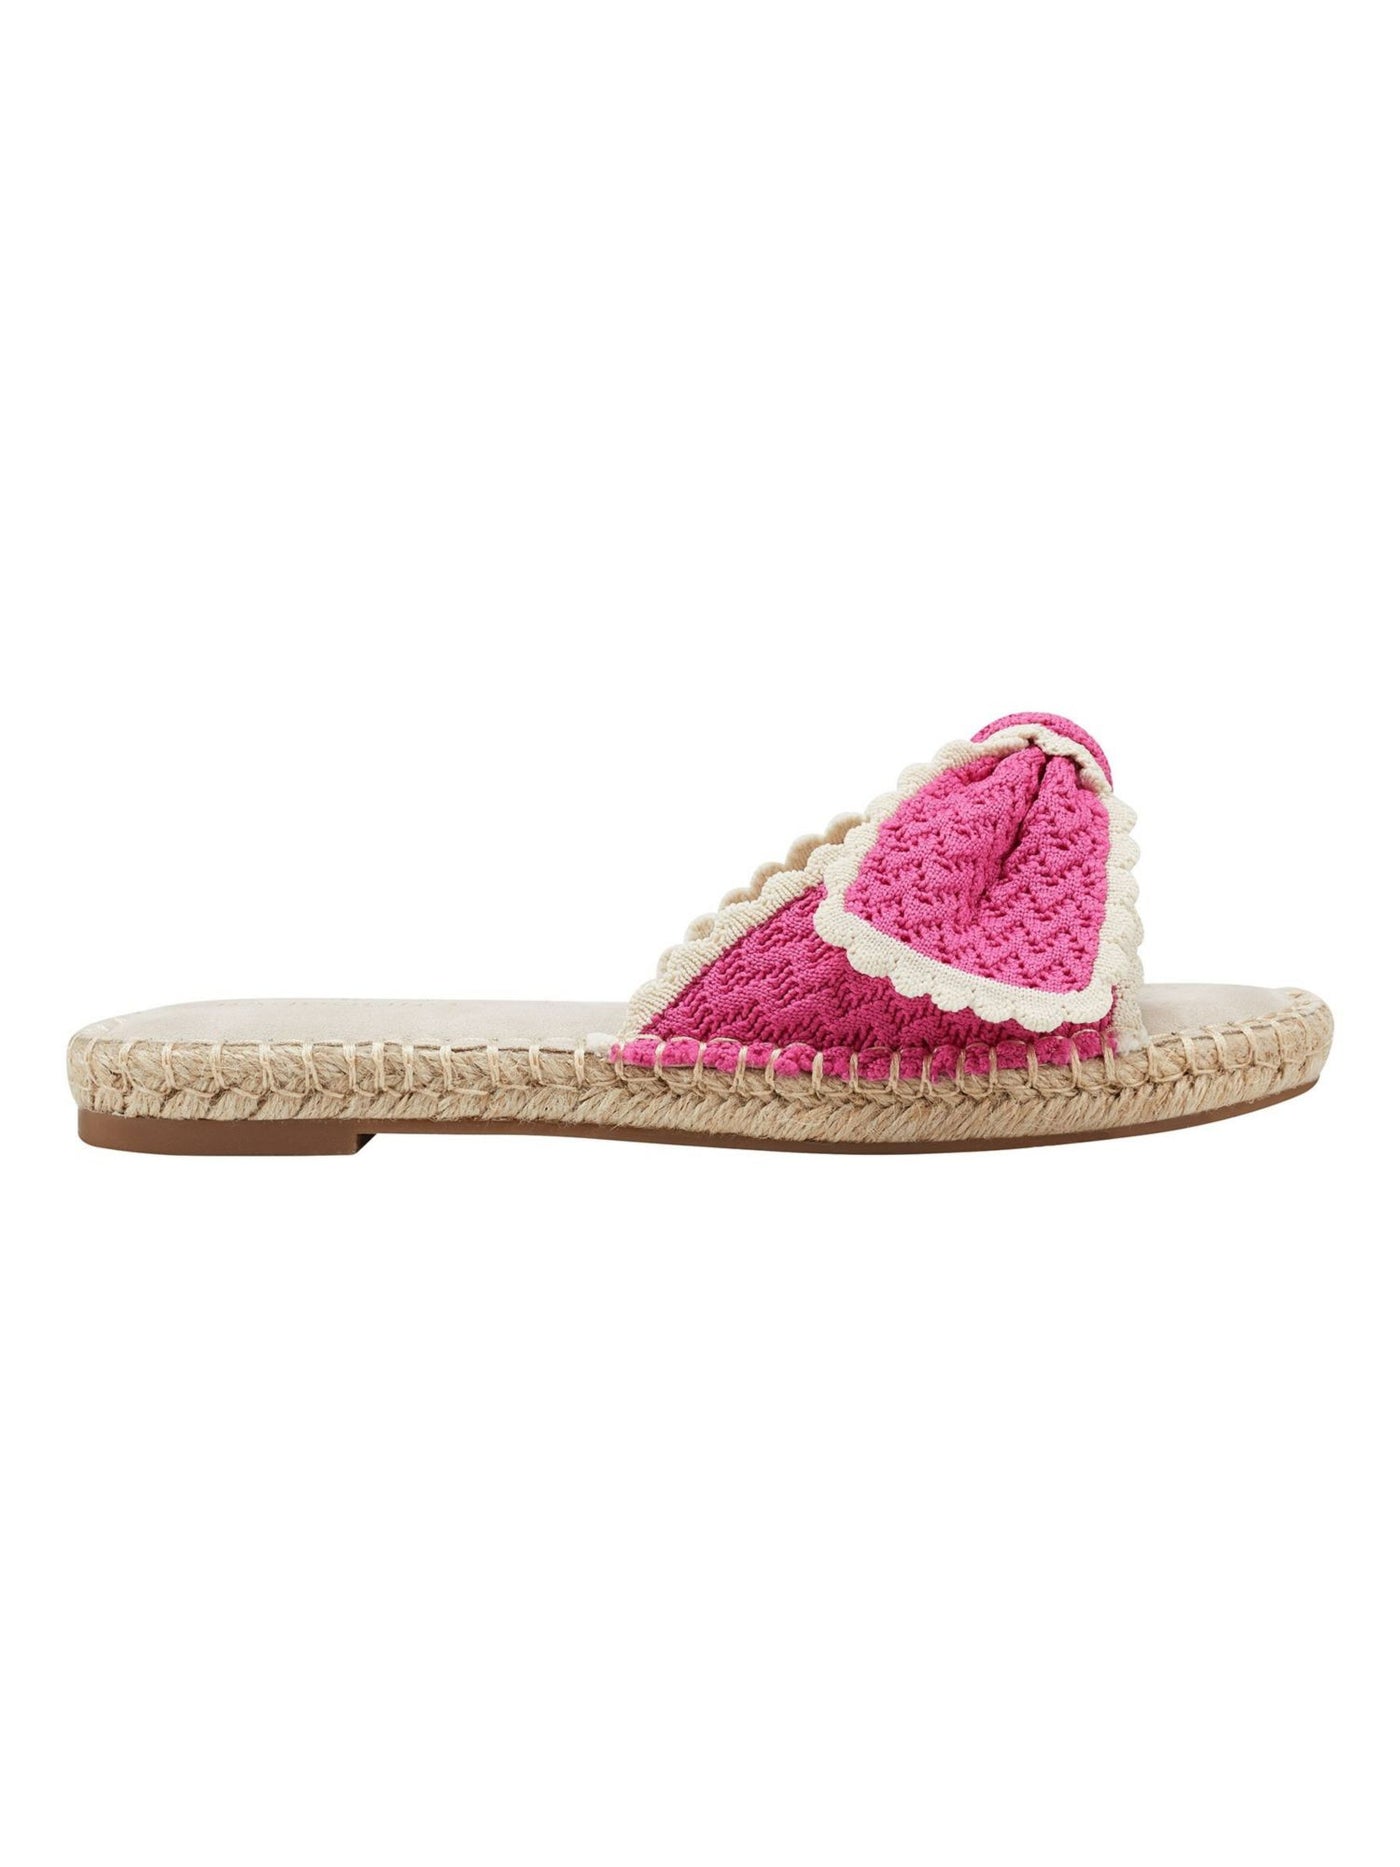 BANDOLINO Womens Pink Knit Bow Accent Padded Braylin Round Toe Slip On Espadrille Shoes 10 M